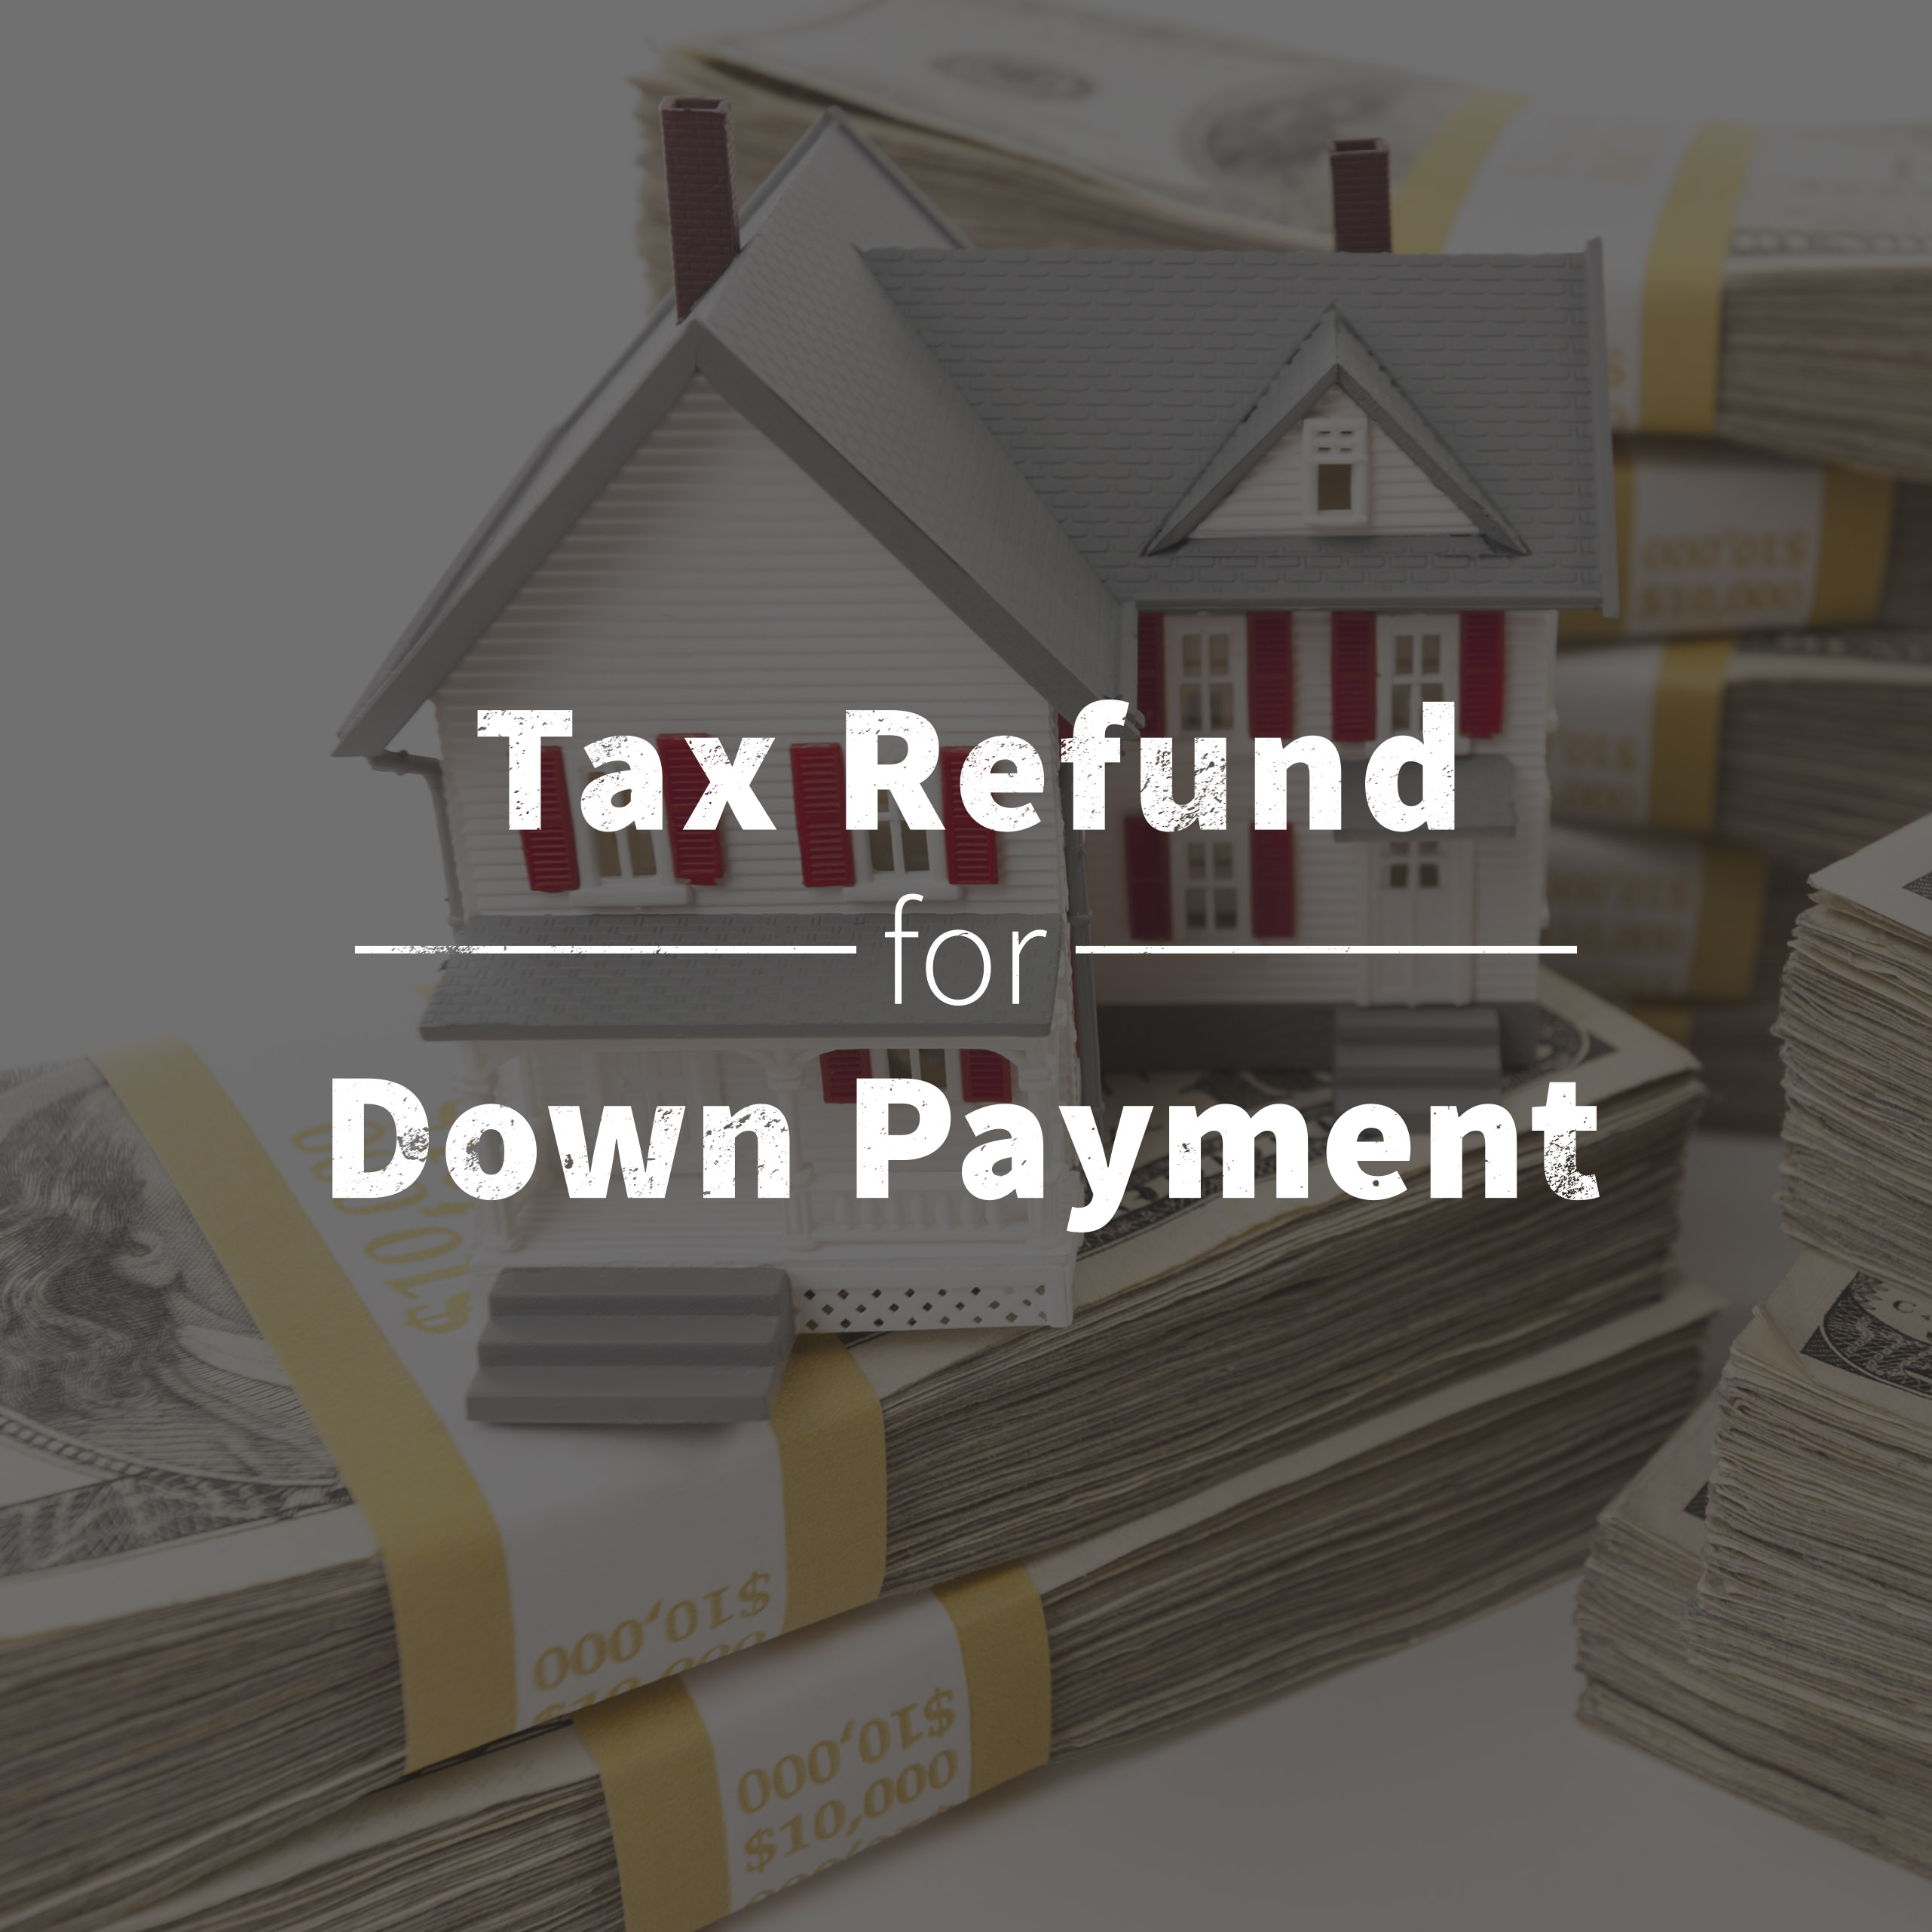 Tax refund for down payment blog.jpg